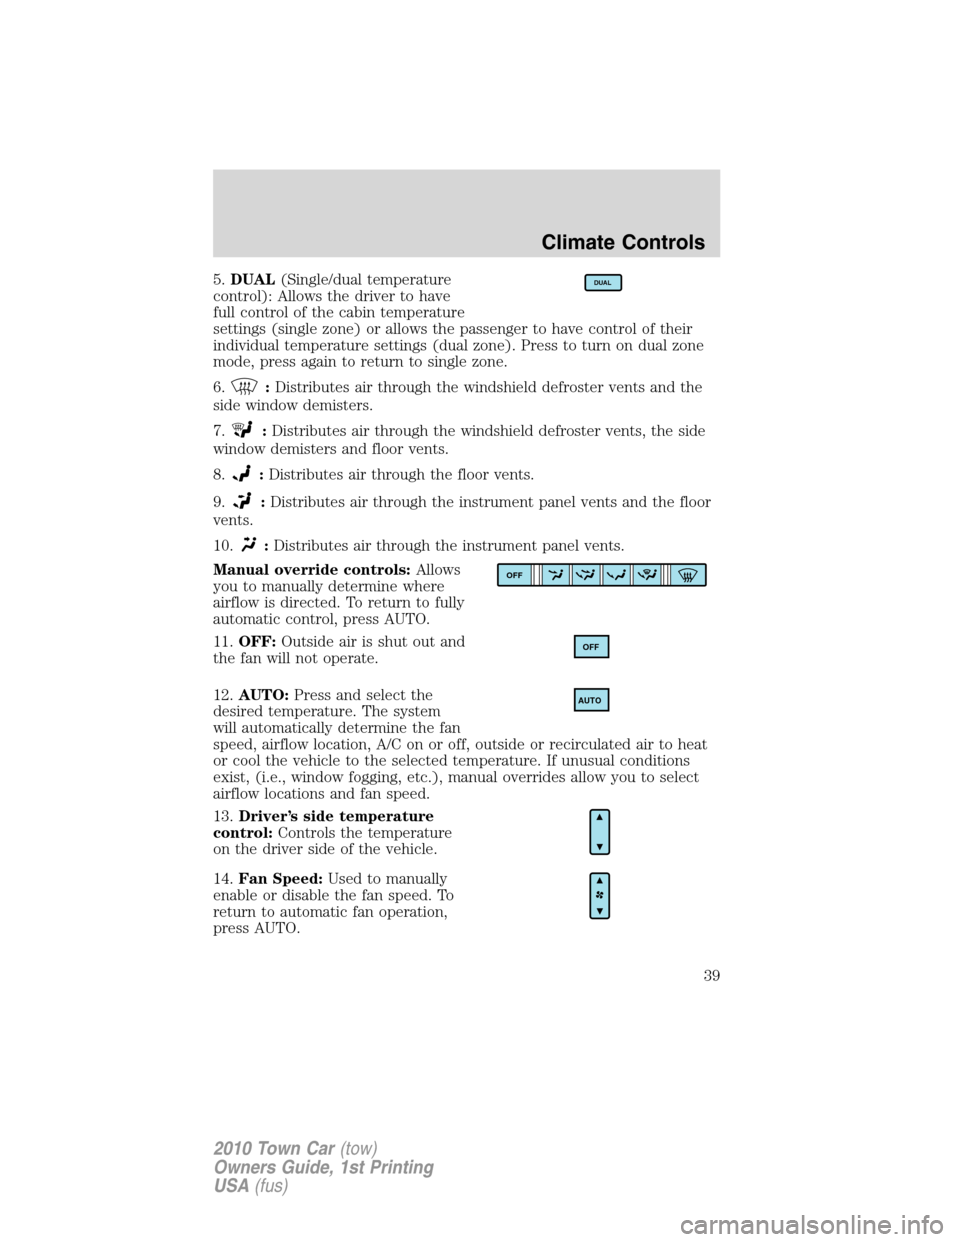 LINCOLN TOWN CAR 2010  Owners Manual 5.DUAL(Single/dual temperature
control): Allows the driver to have
full control of the cabin temperature
settings (single zone) or allows the passenger to have control of their
individual temperature 